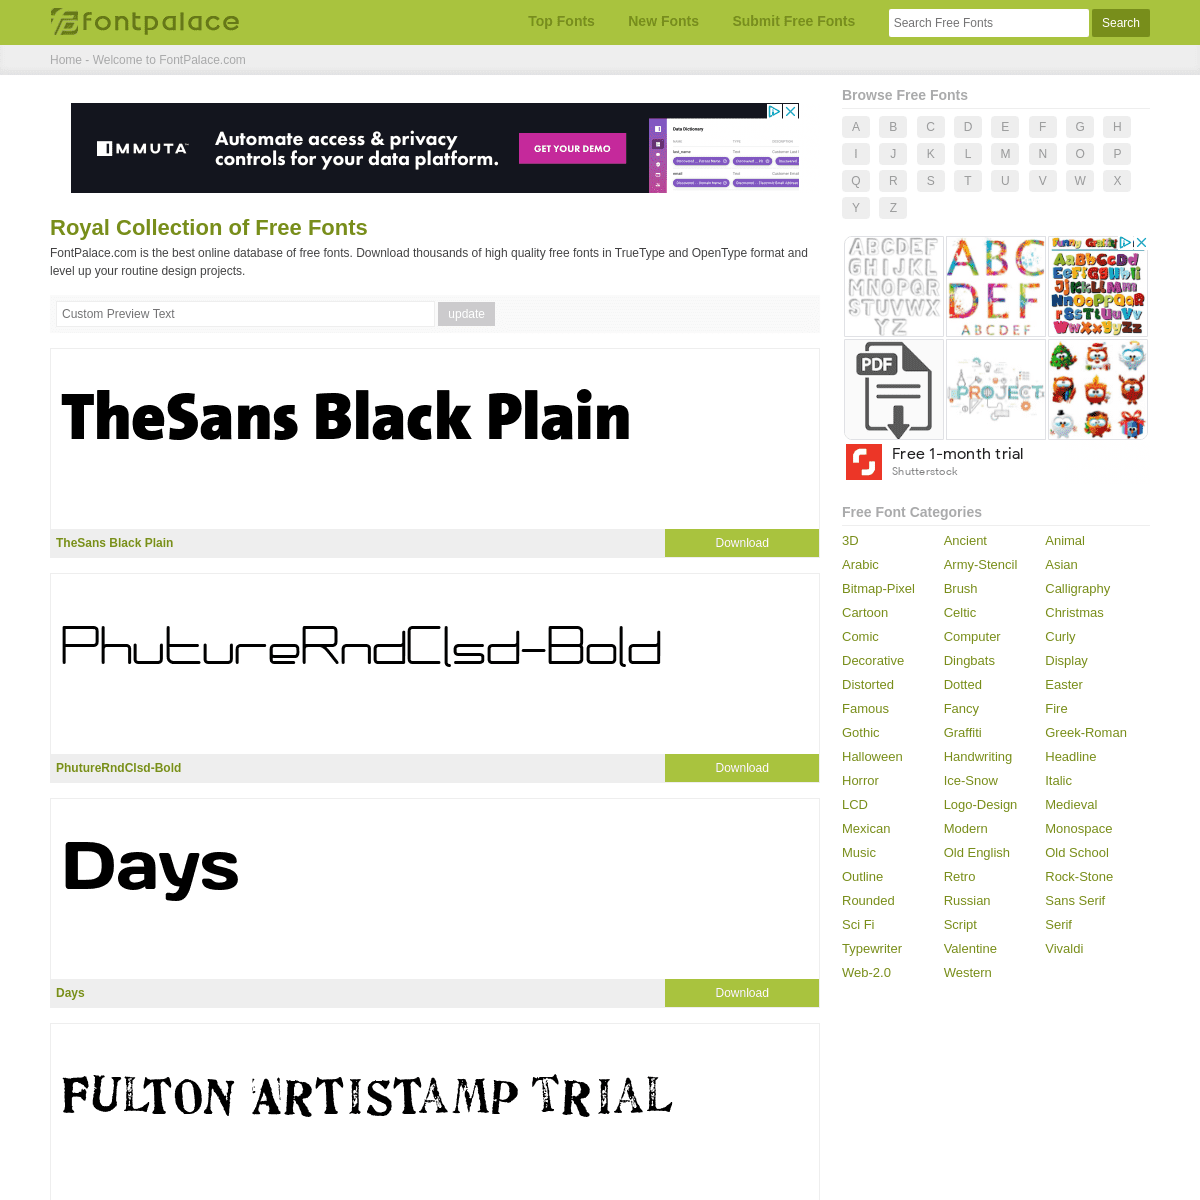 A complete backup of https://fontpalace.com